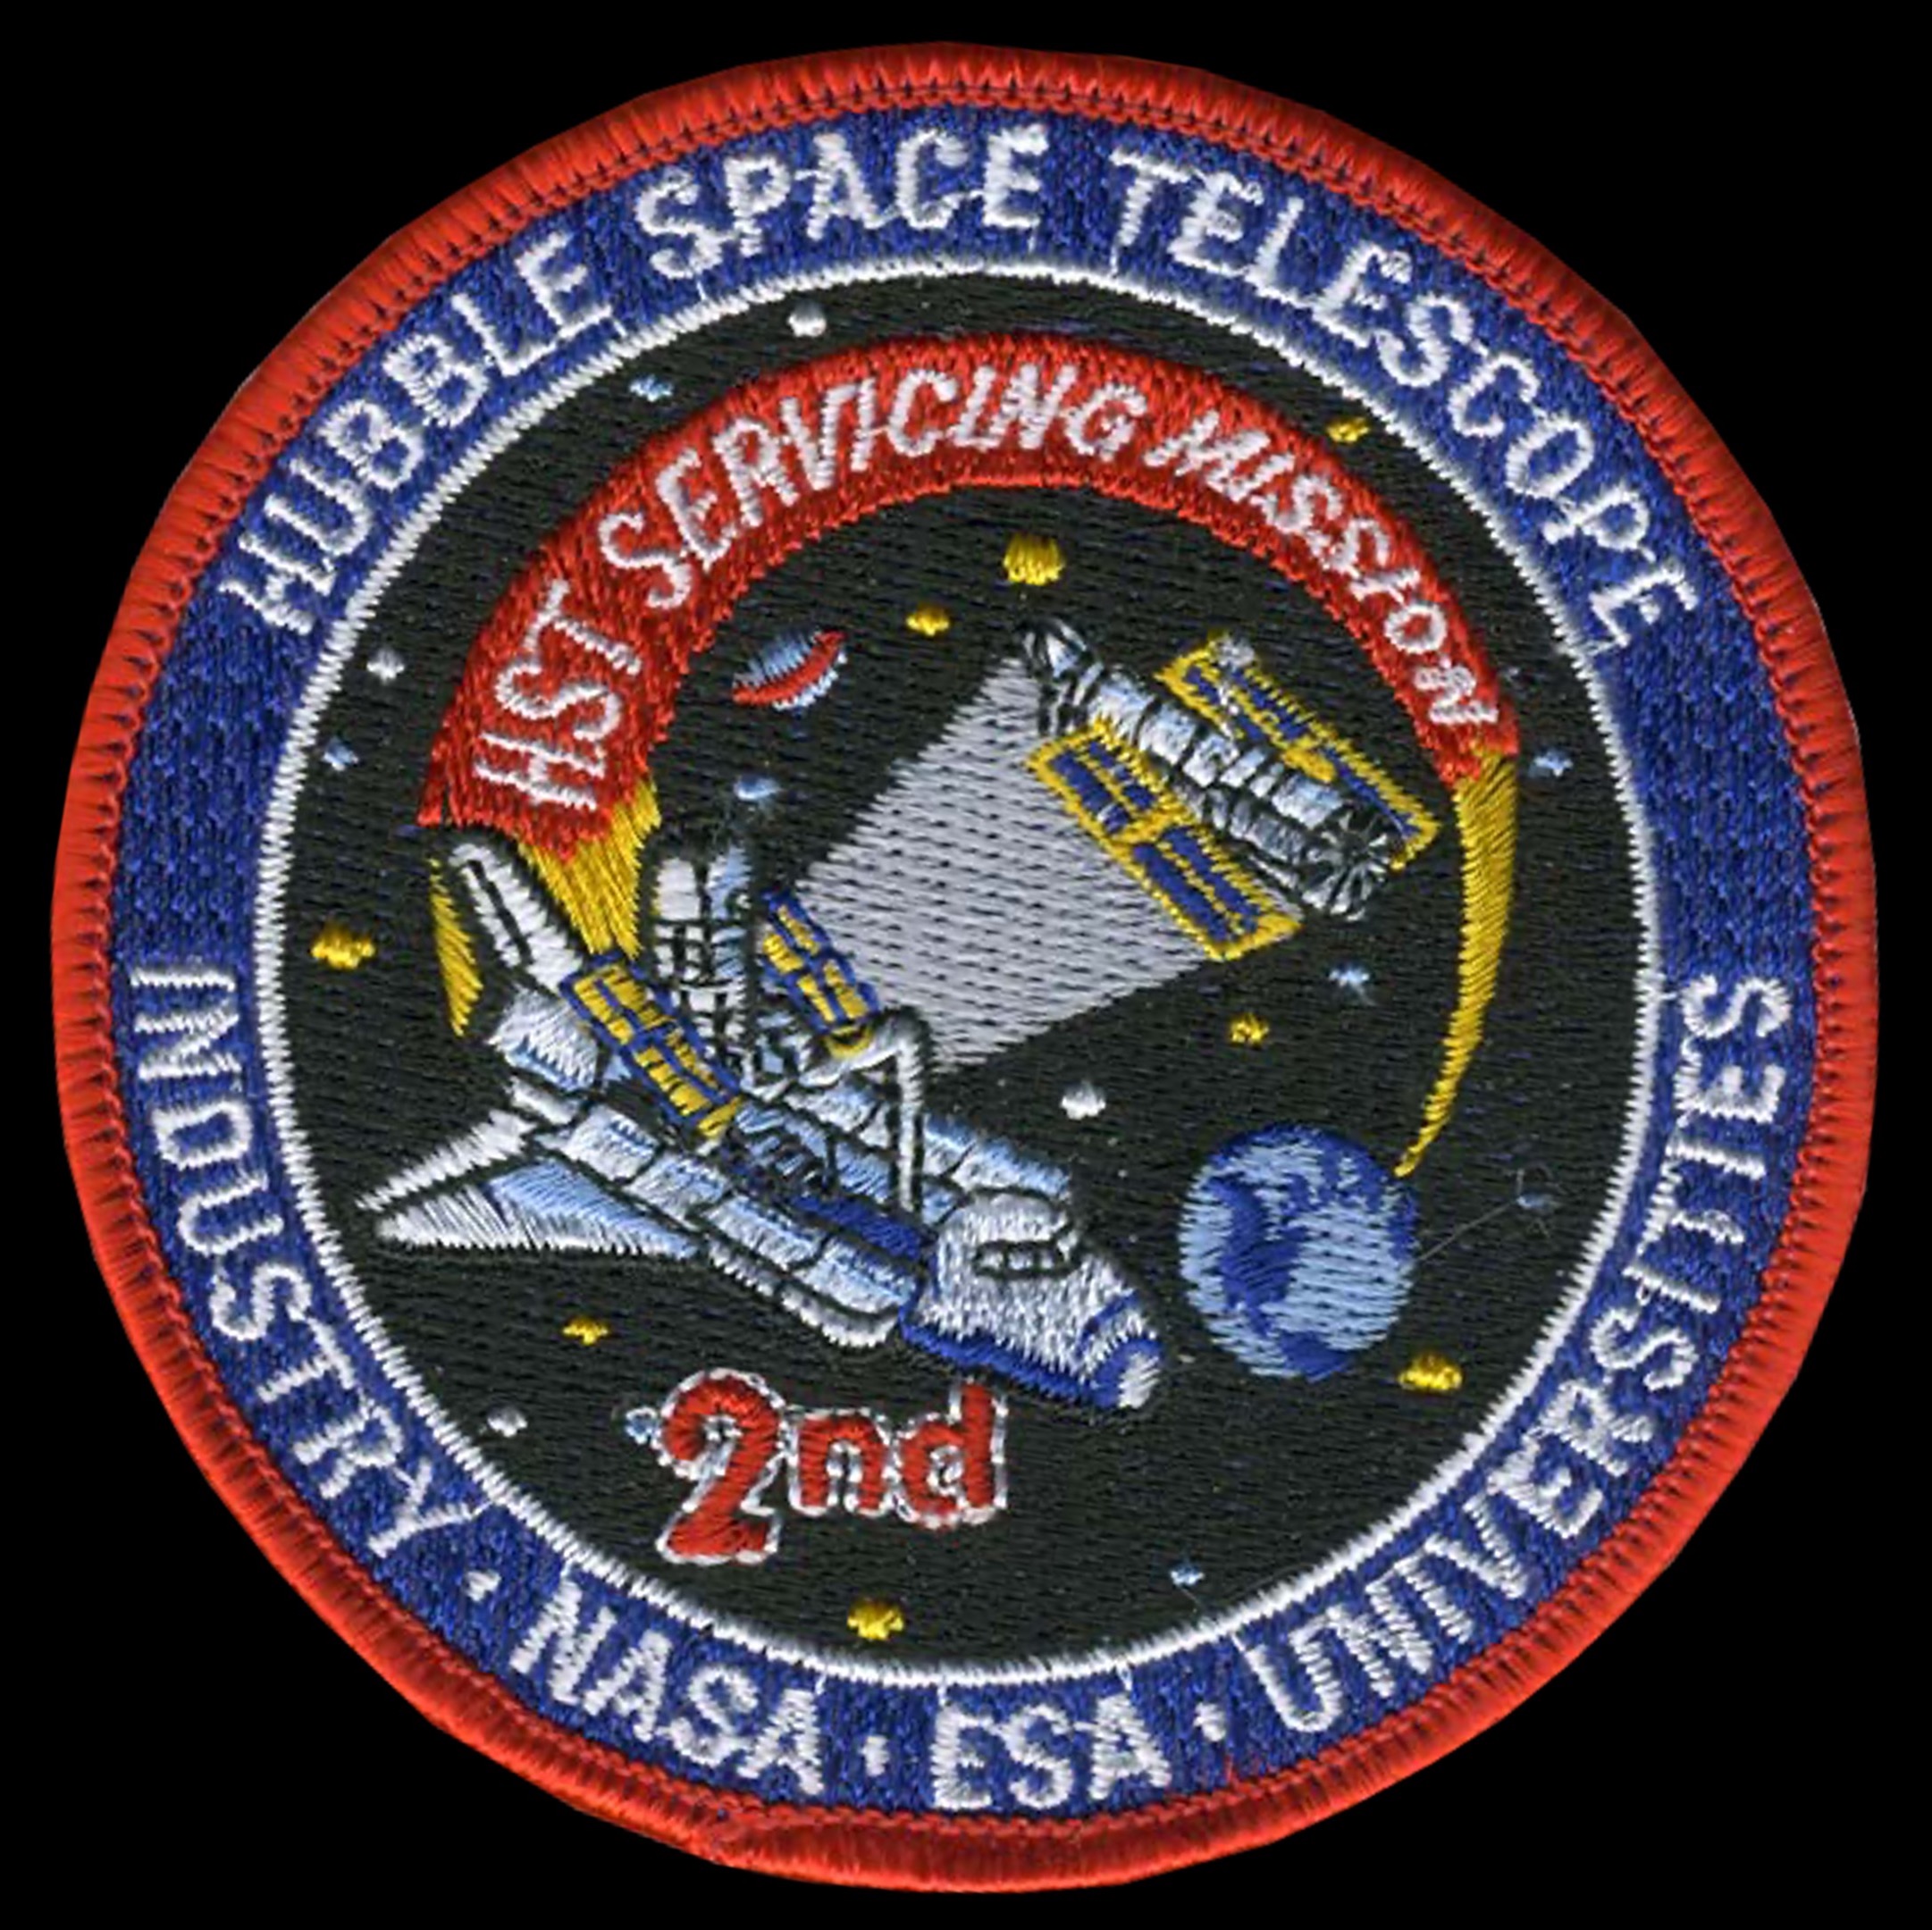 Servicing Mission 2 Patch